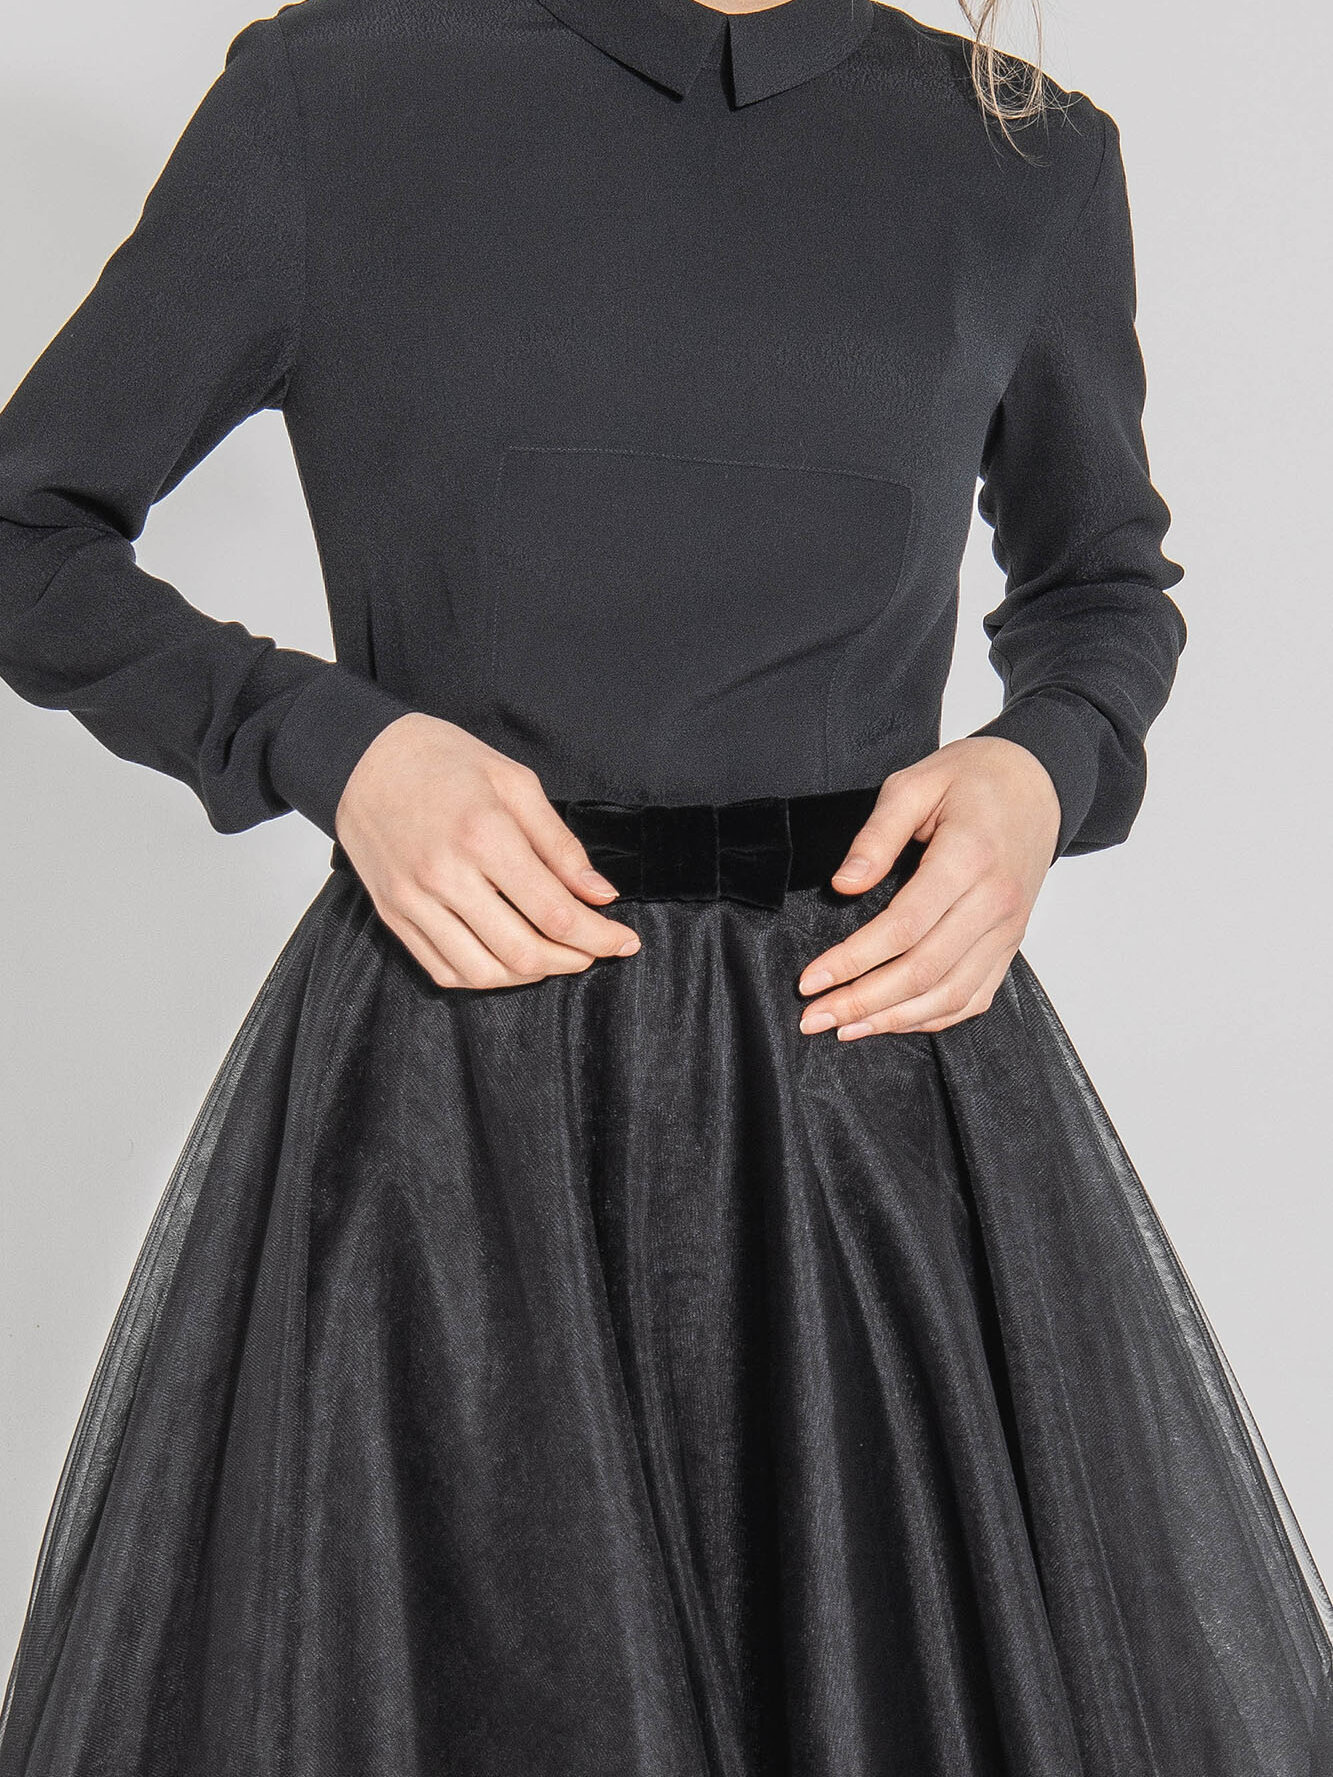 tulle skirt with a bow on the belt in black close up uai • Sassa Björg